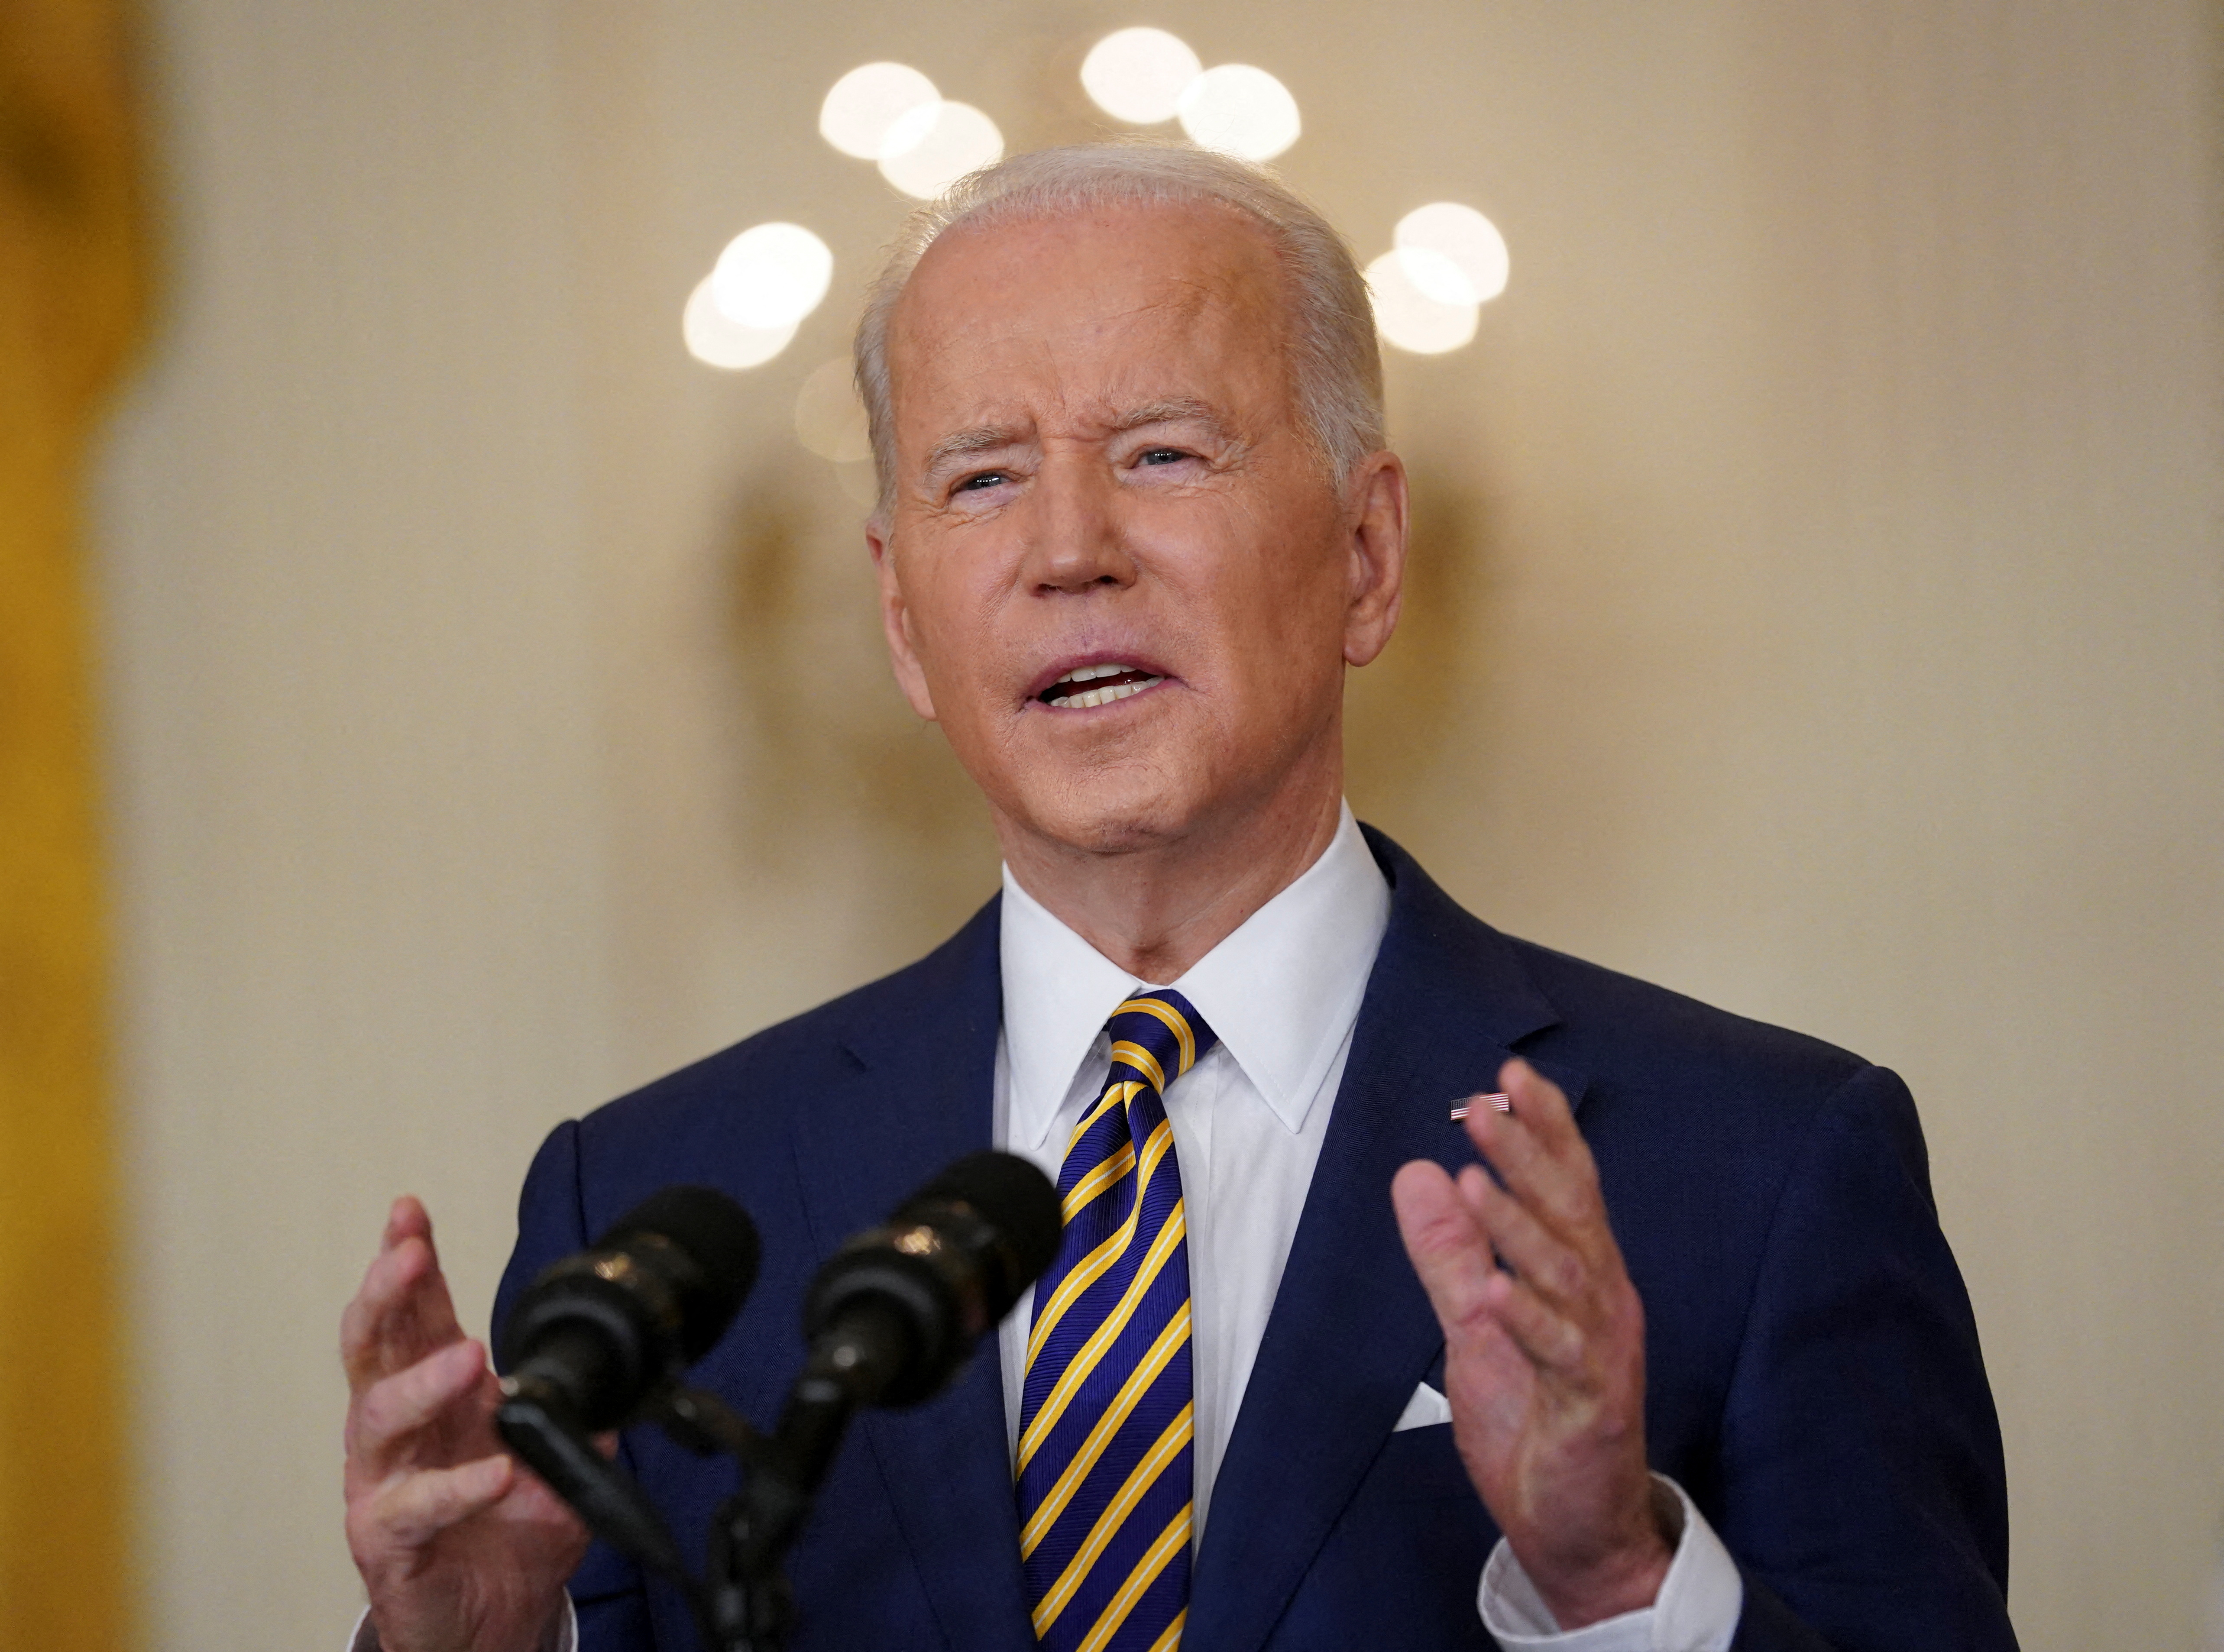 U.S. President Joe Biden holds a formal news conference at the White House